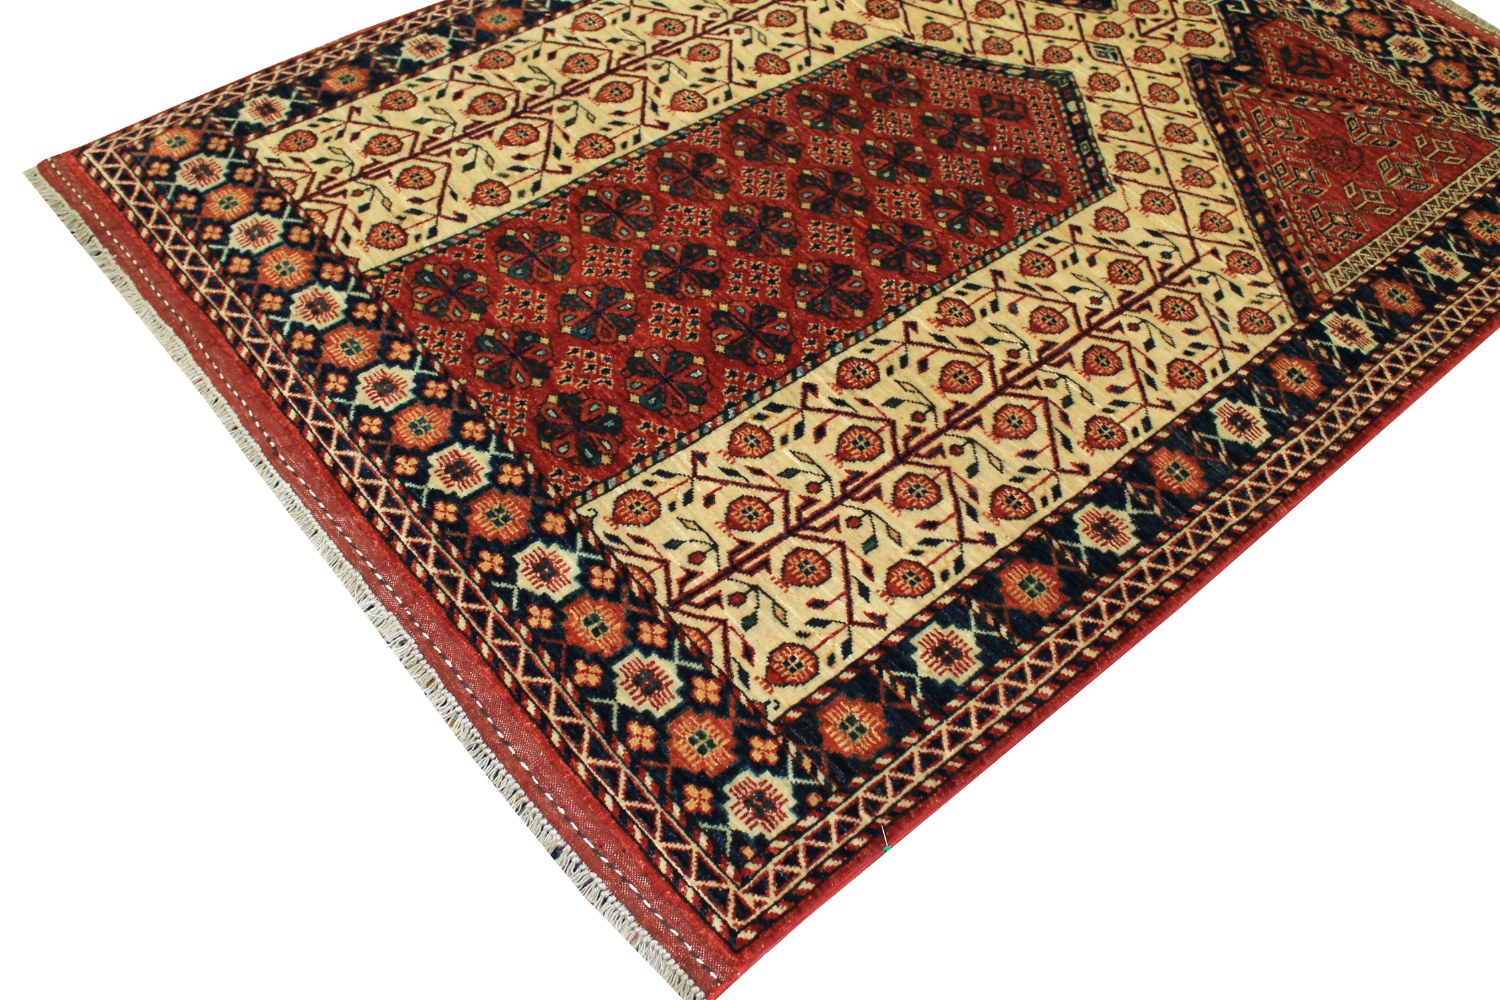 4x6 Antique Revival Hand Knotted Wool Area Rug - MR20896